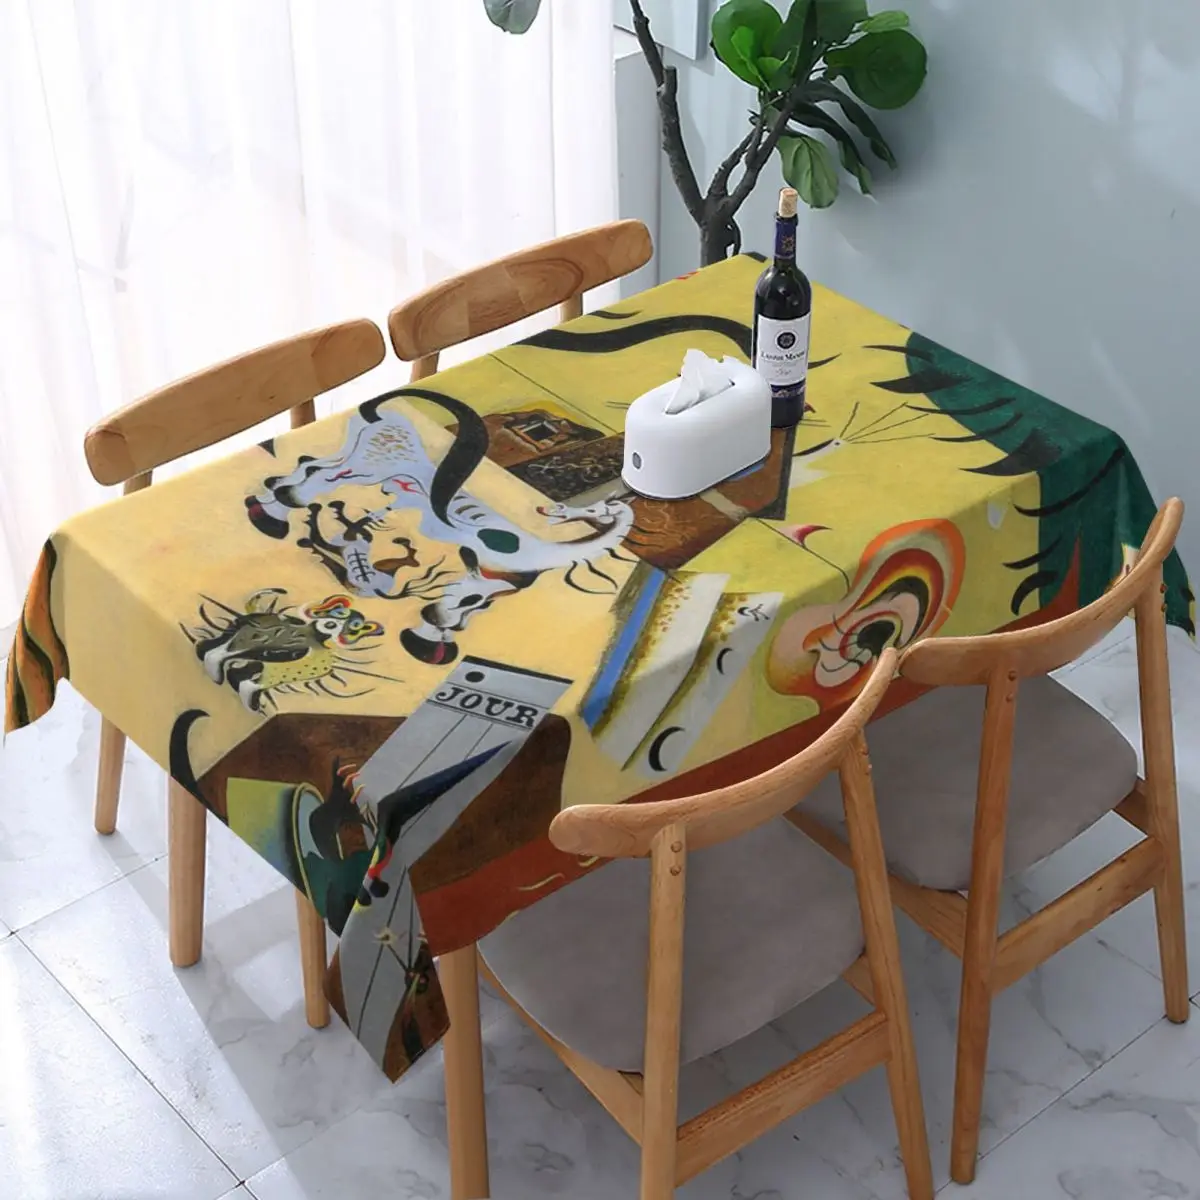 

Rectangular Waterproof The Tilled Field By Joan Joan Miro Tablecloth Backing Elastic Edge Table Covers Surrealism Table Cloth